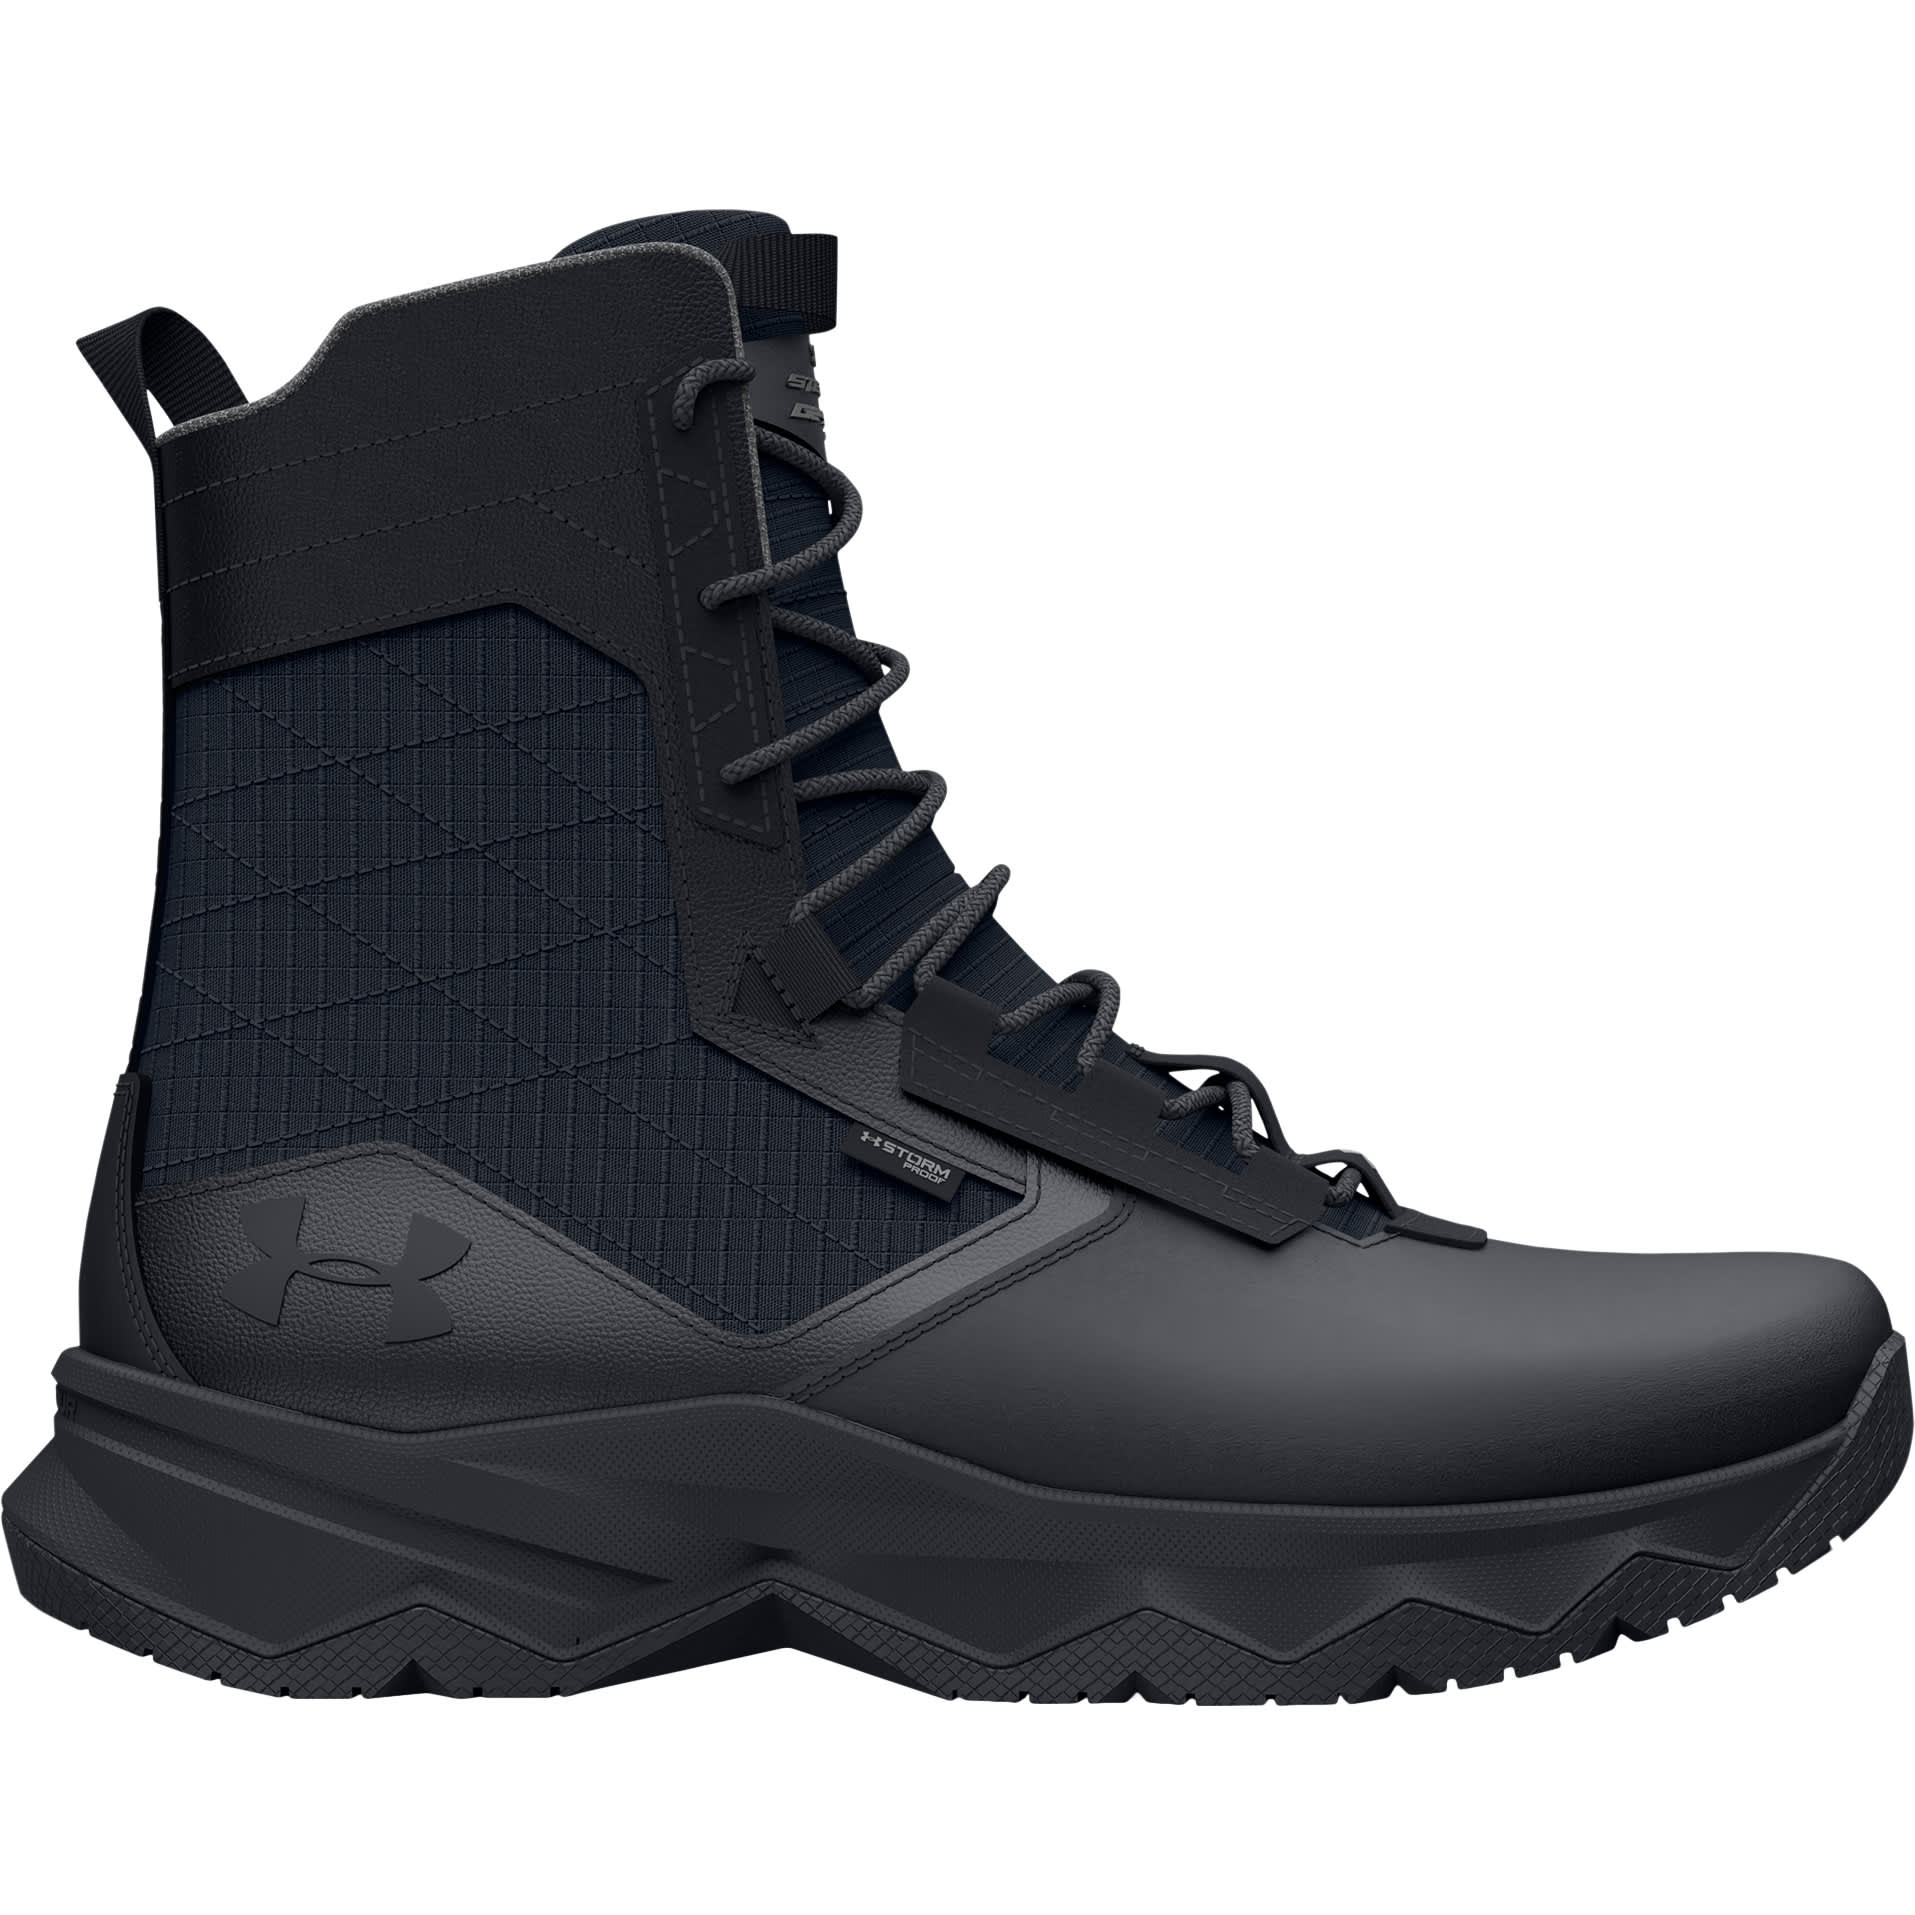 Under Armour Micro G® Valsetz Mid Tactical Boots Coyote